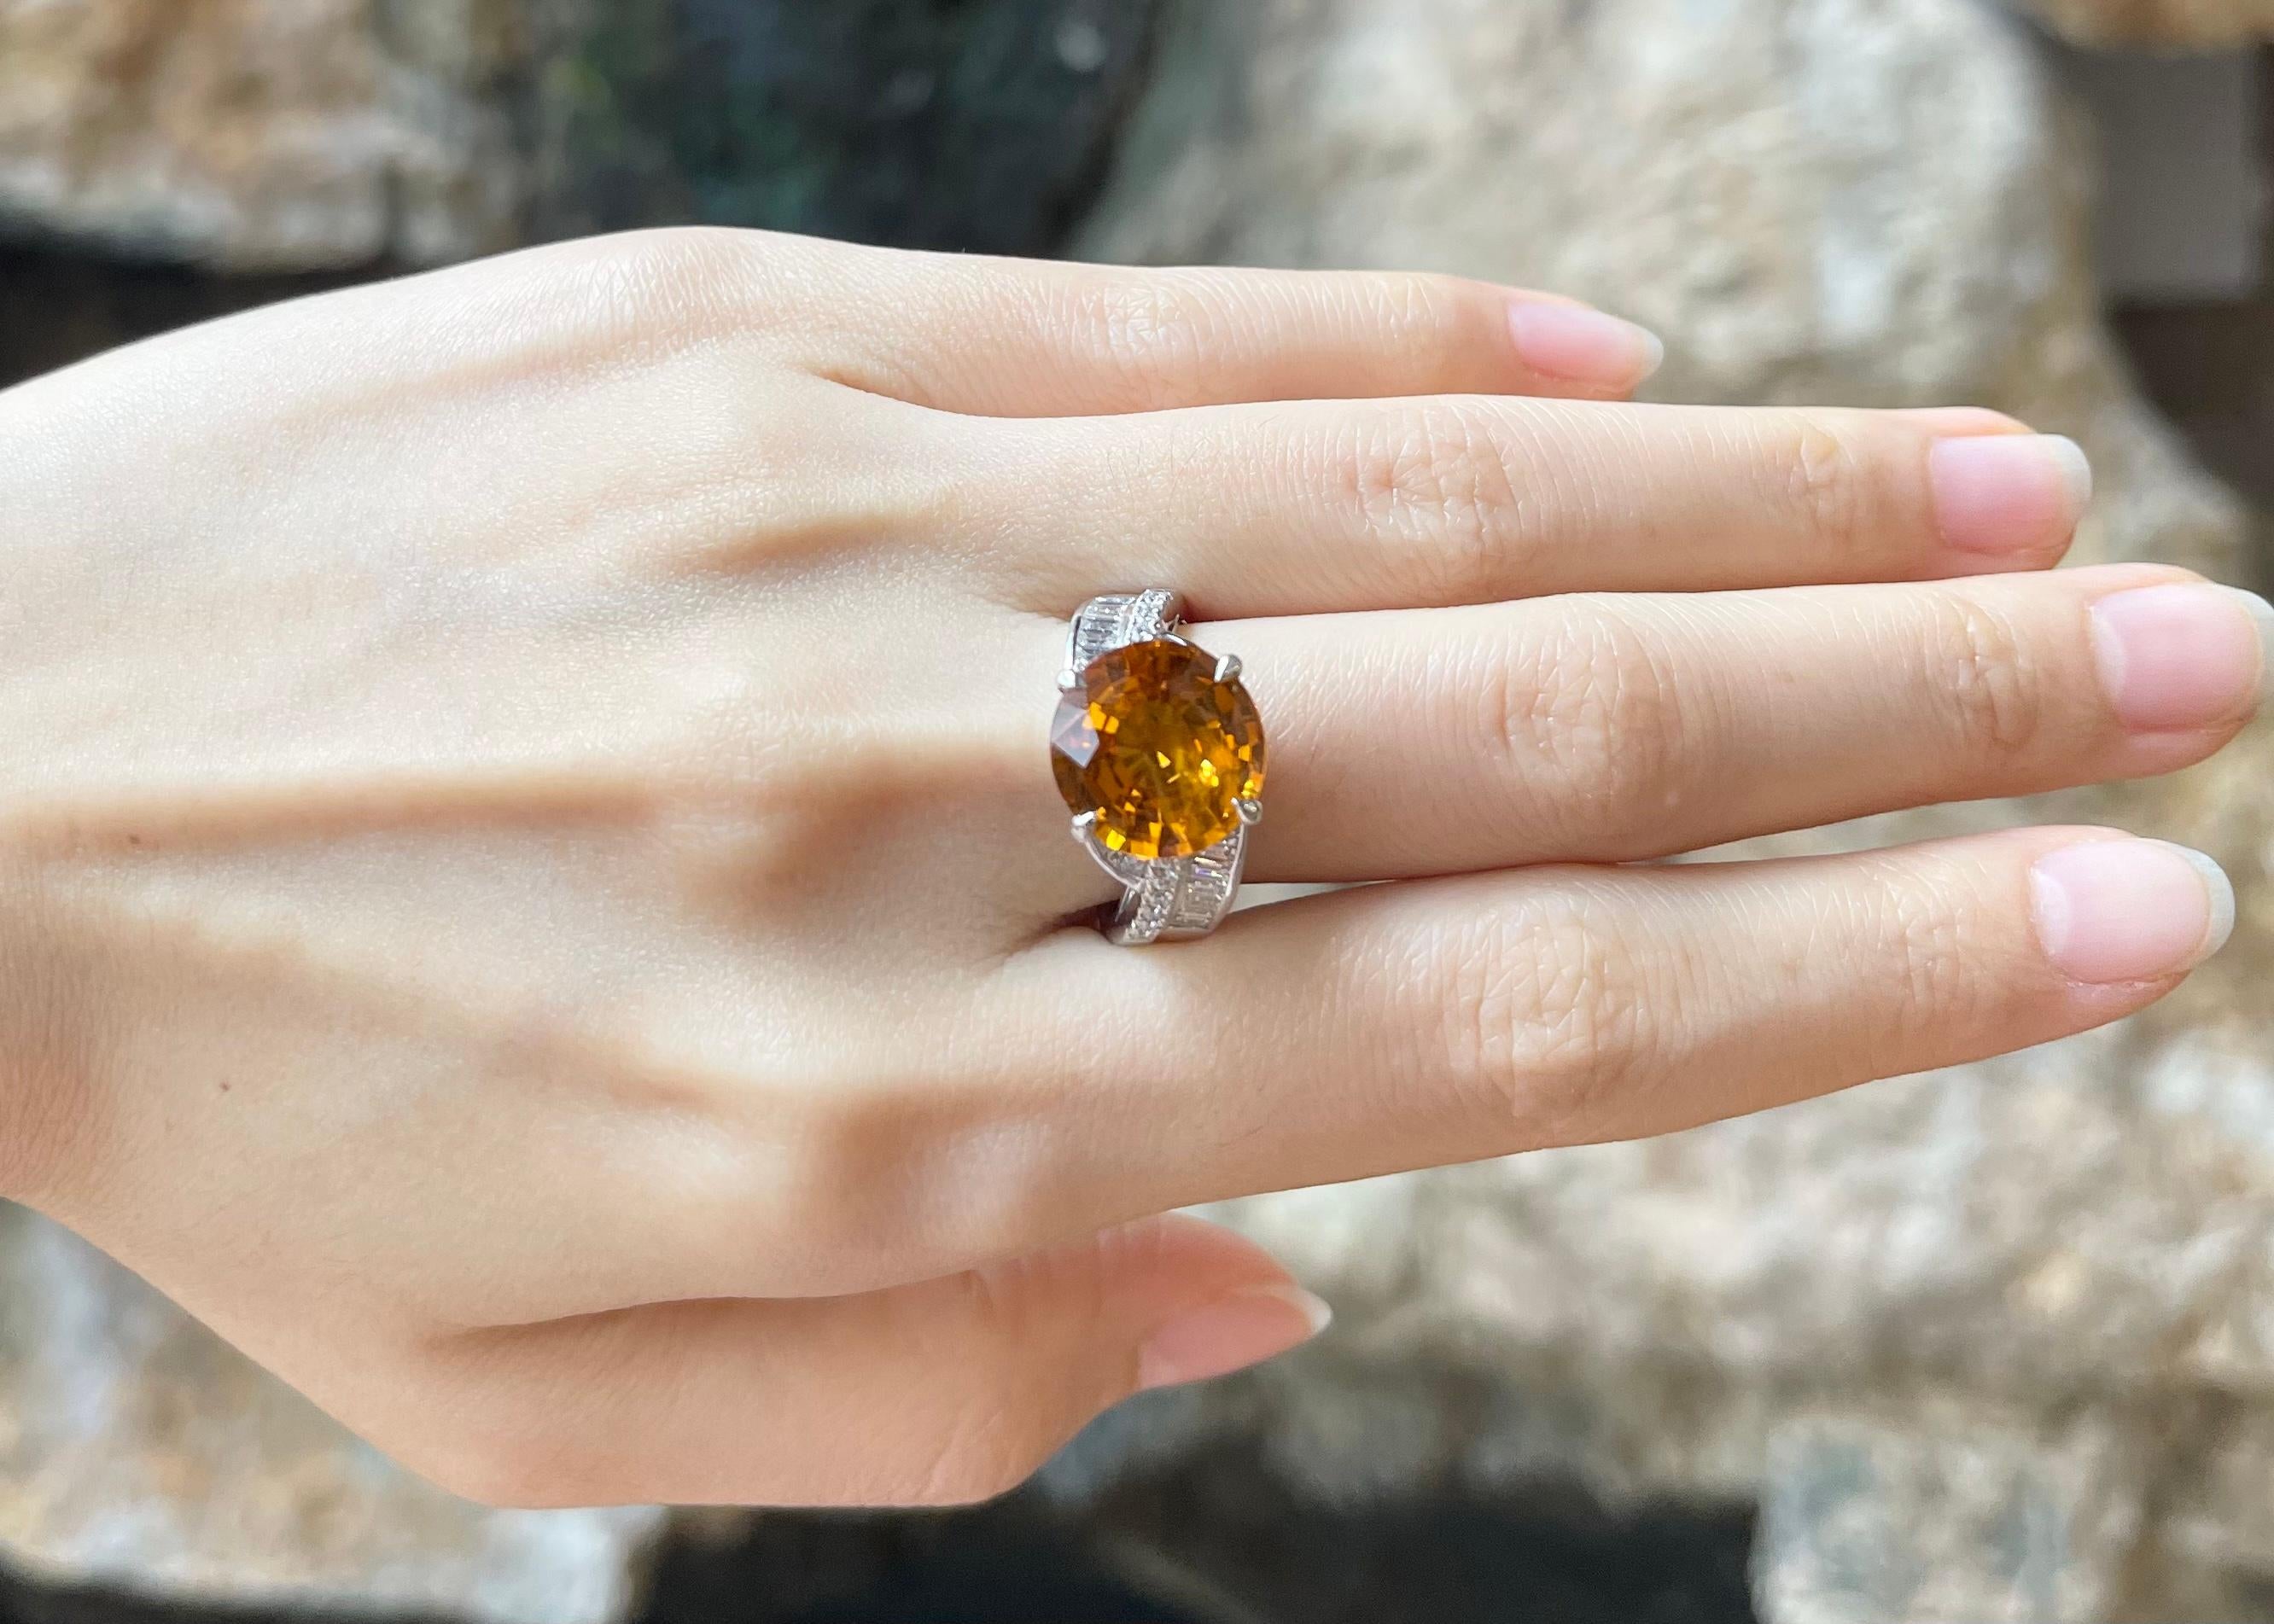 Yellow Sapphire 7.73 carats with Diamond 0.91 carat Ring set in 18K White Gold Settings

Width:  1.2 cm 
Length: 1.2 cm
Ring Size: 57
Total Weight: 12.47 grams

